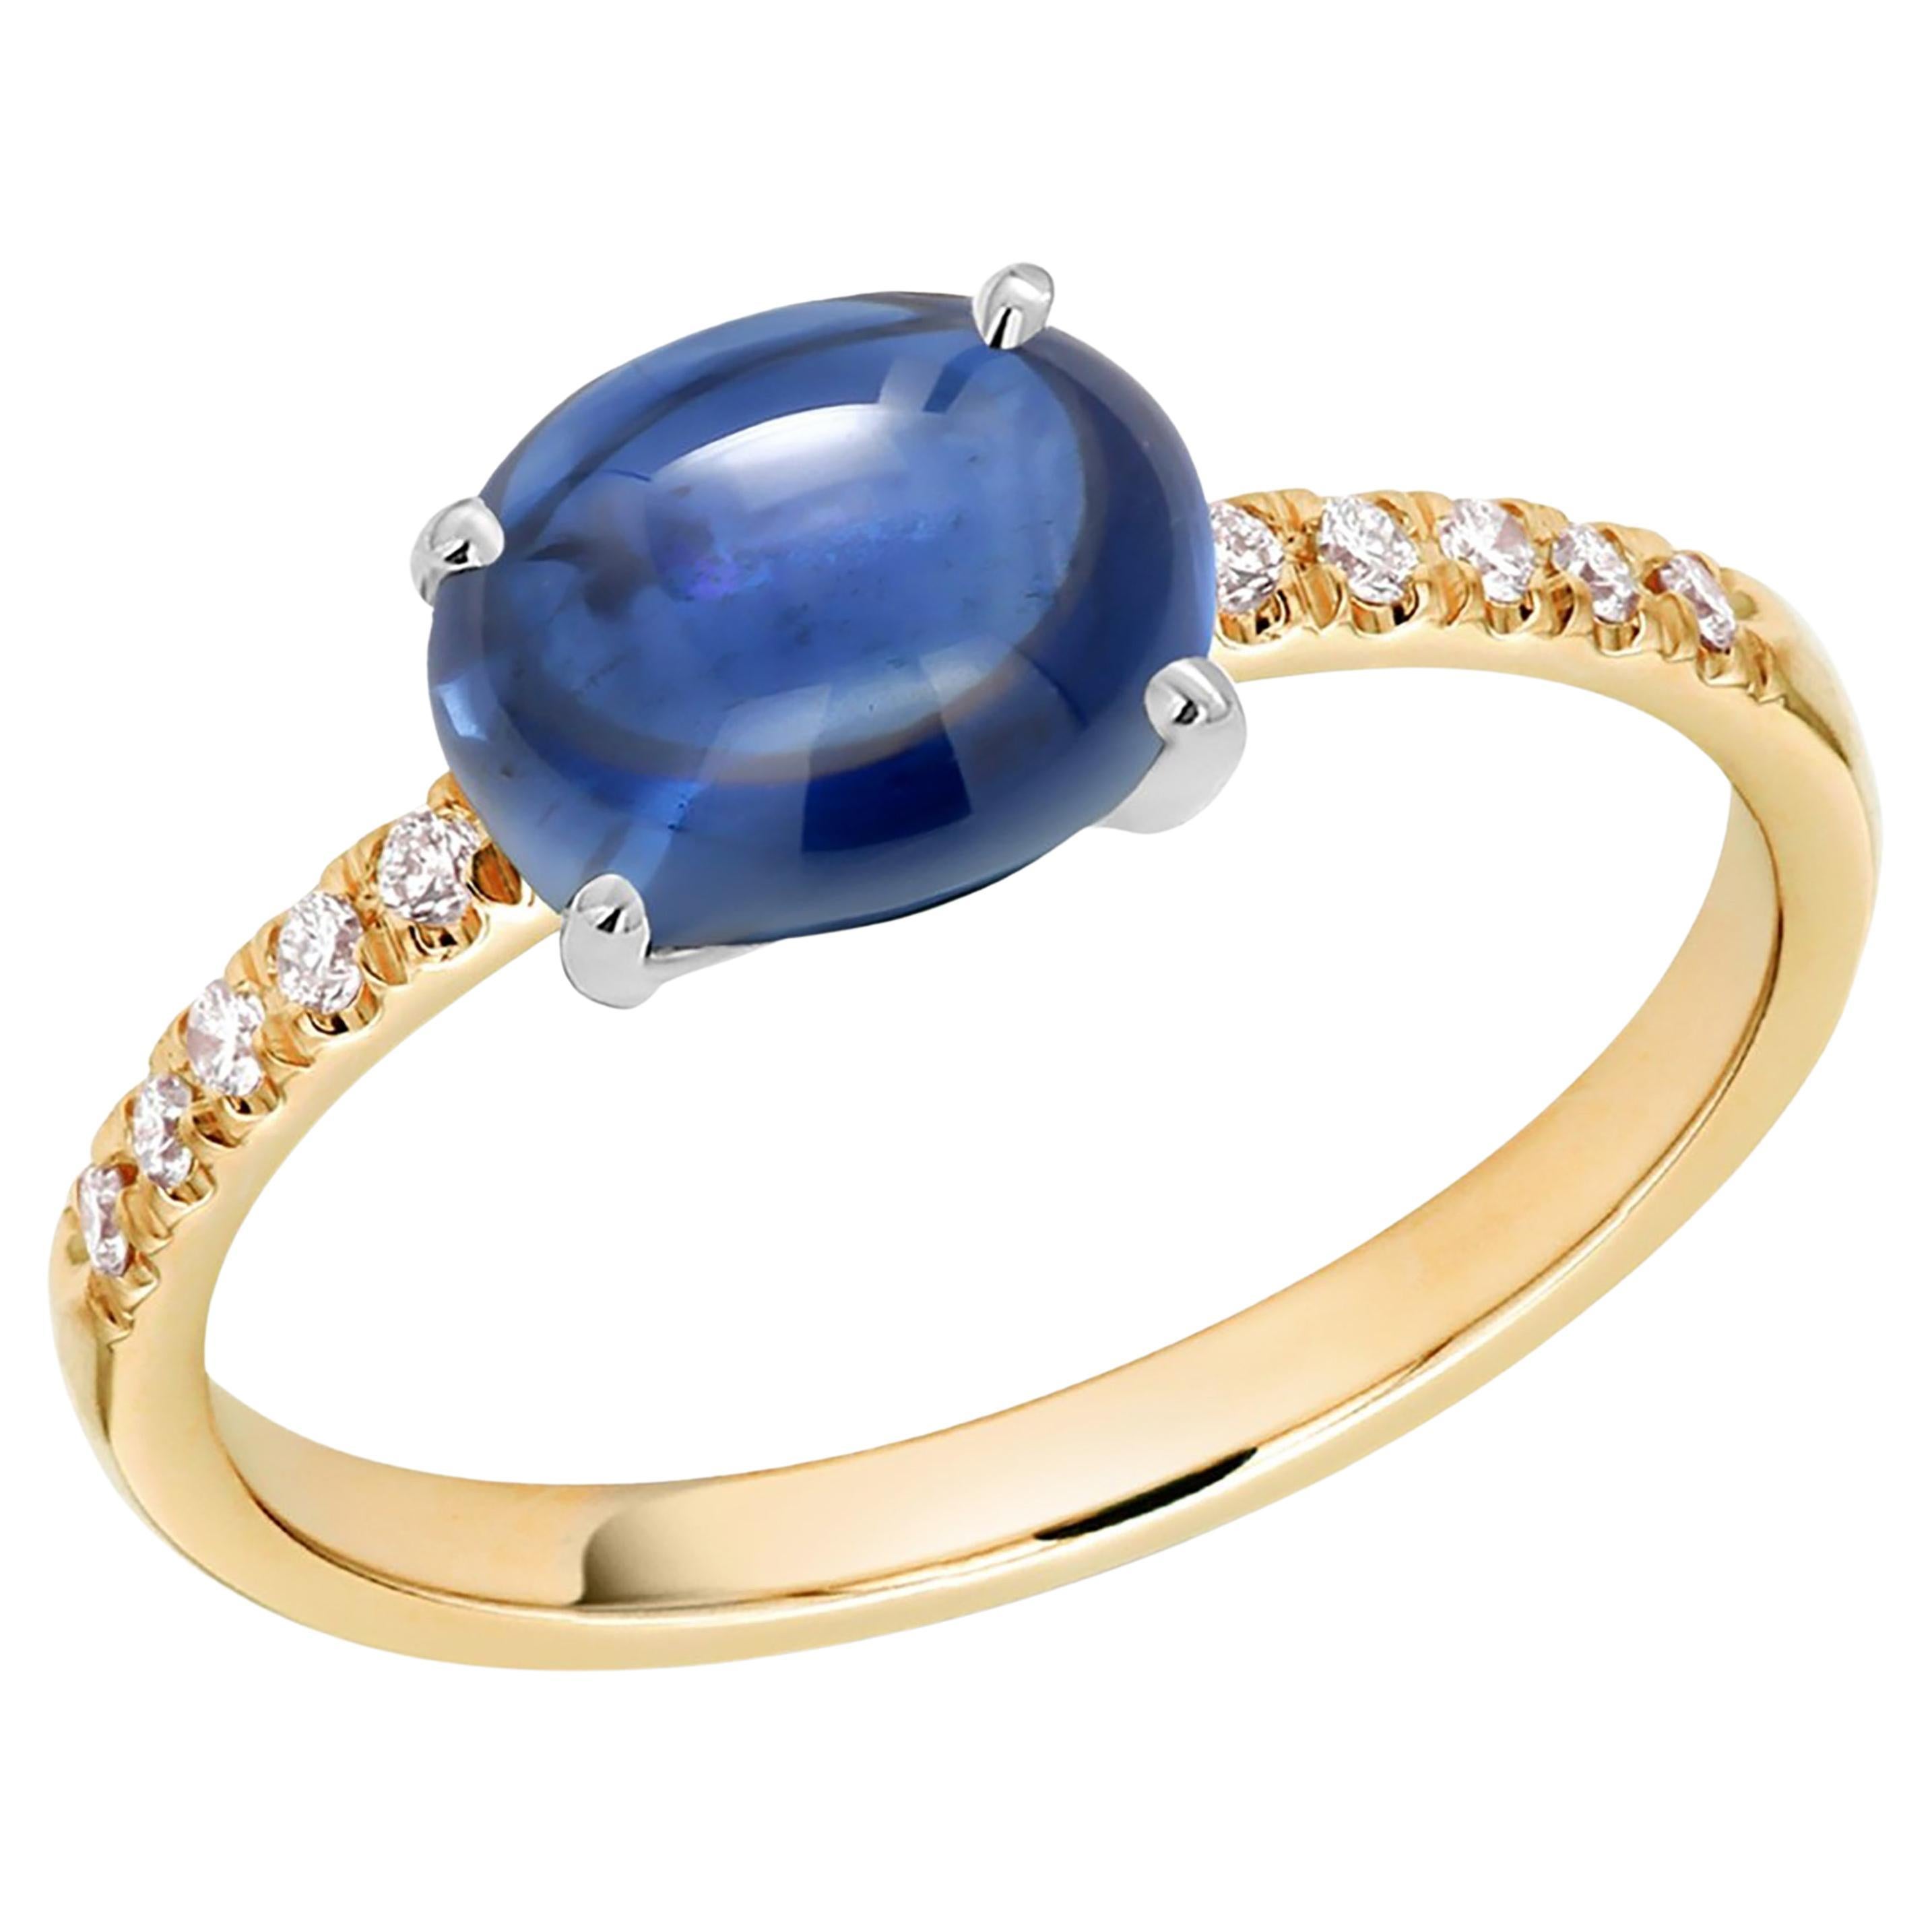 Ceylon Cabochon Sapphire Diamond 3.65 Carat Yellow and White Gold Size 7 Ring For Sale